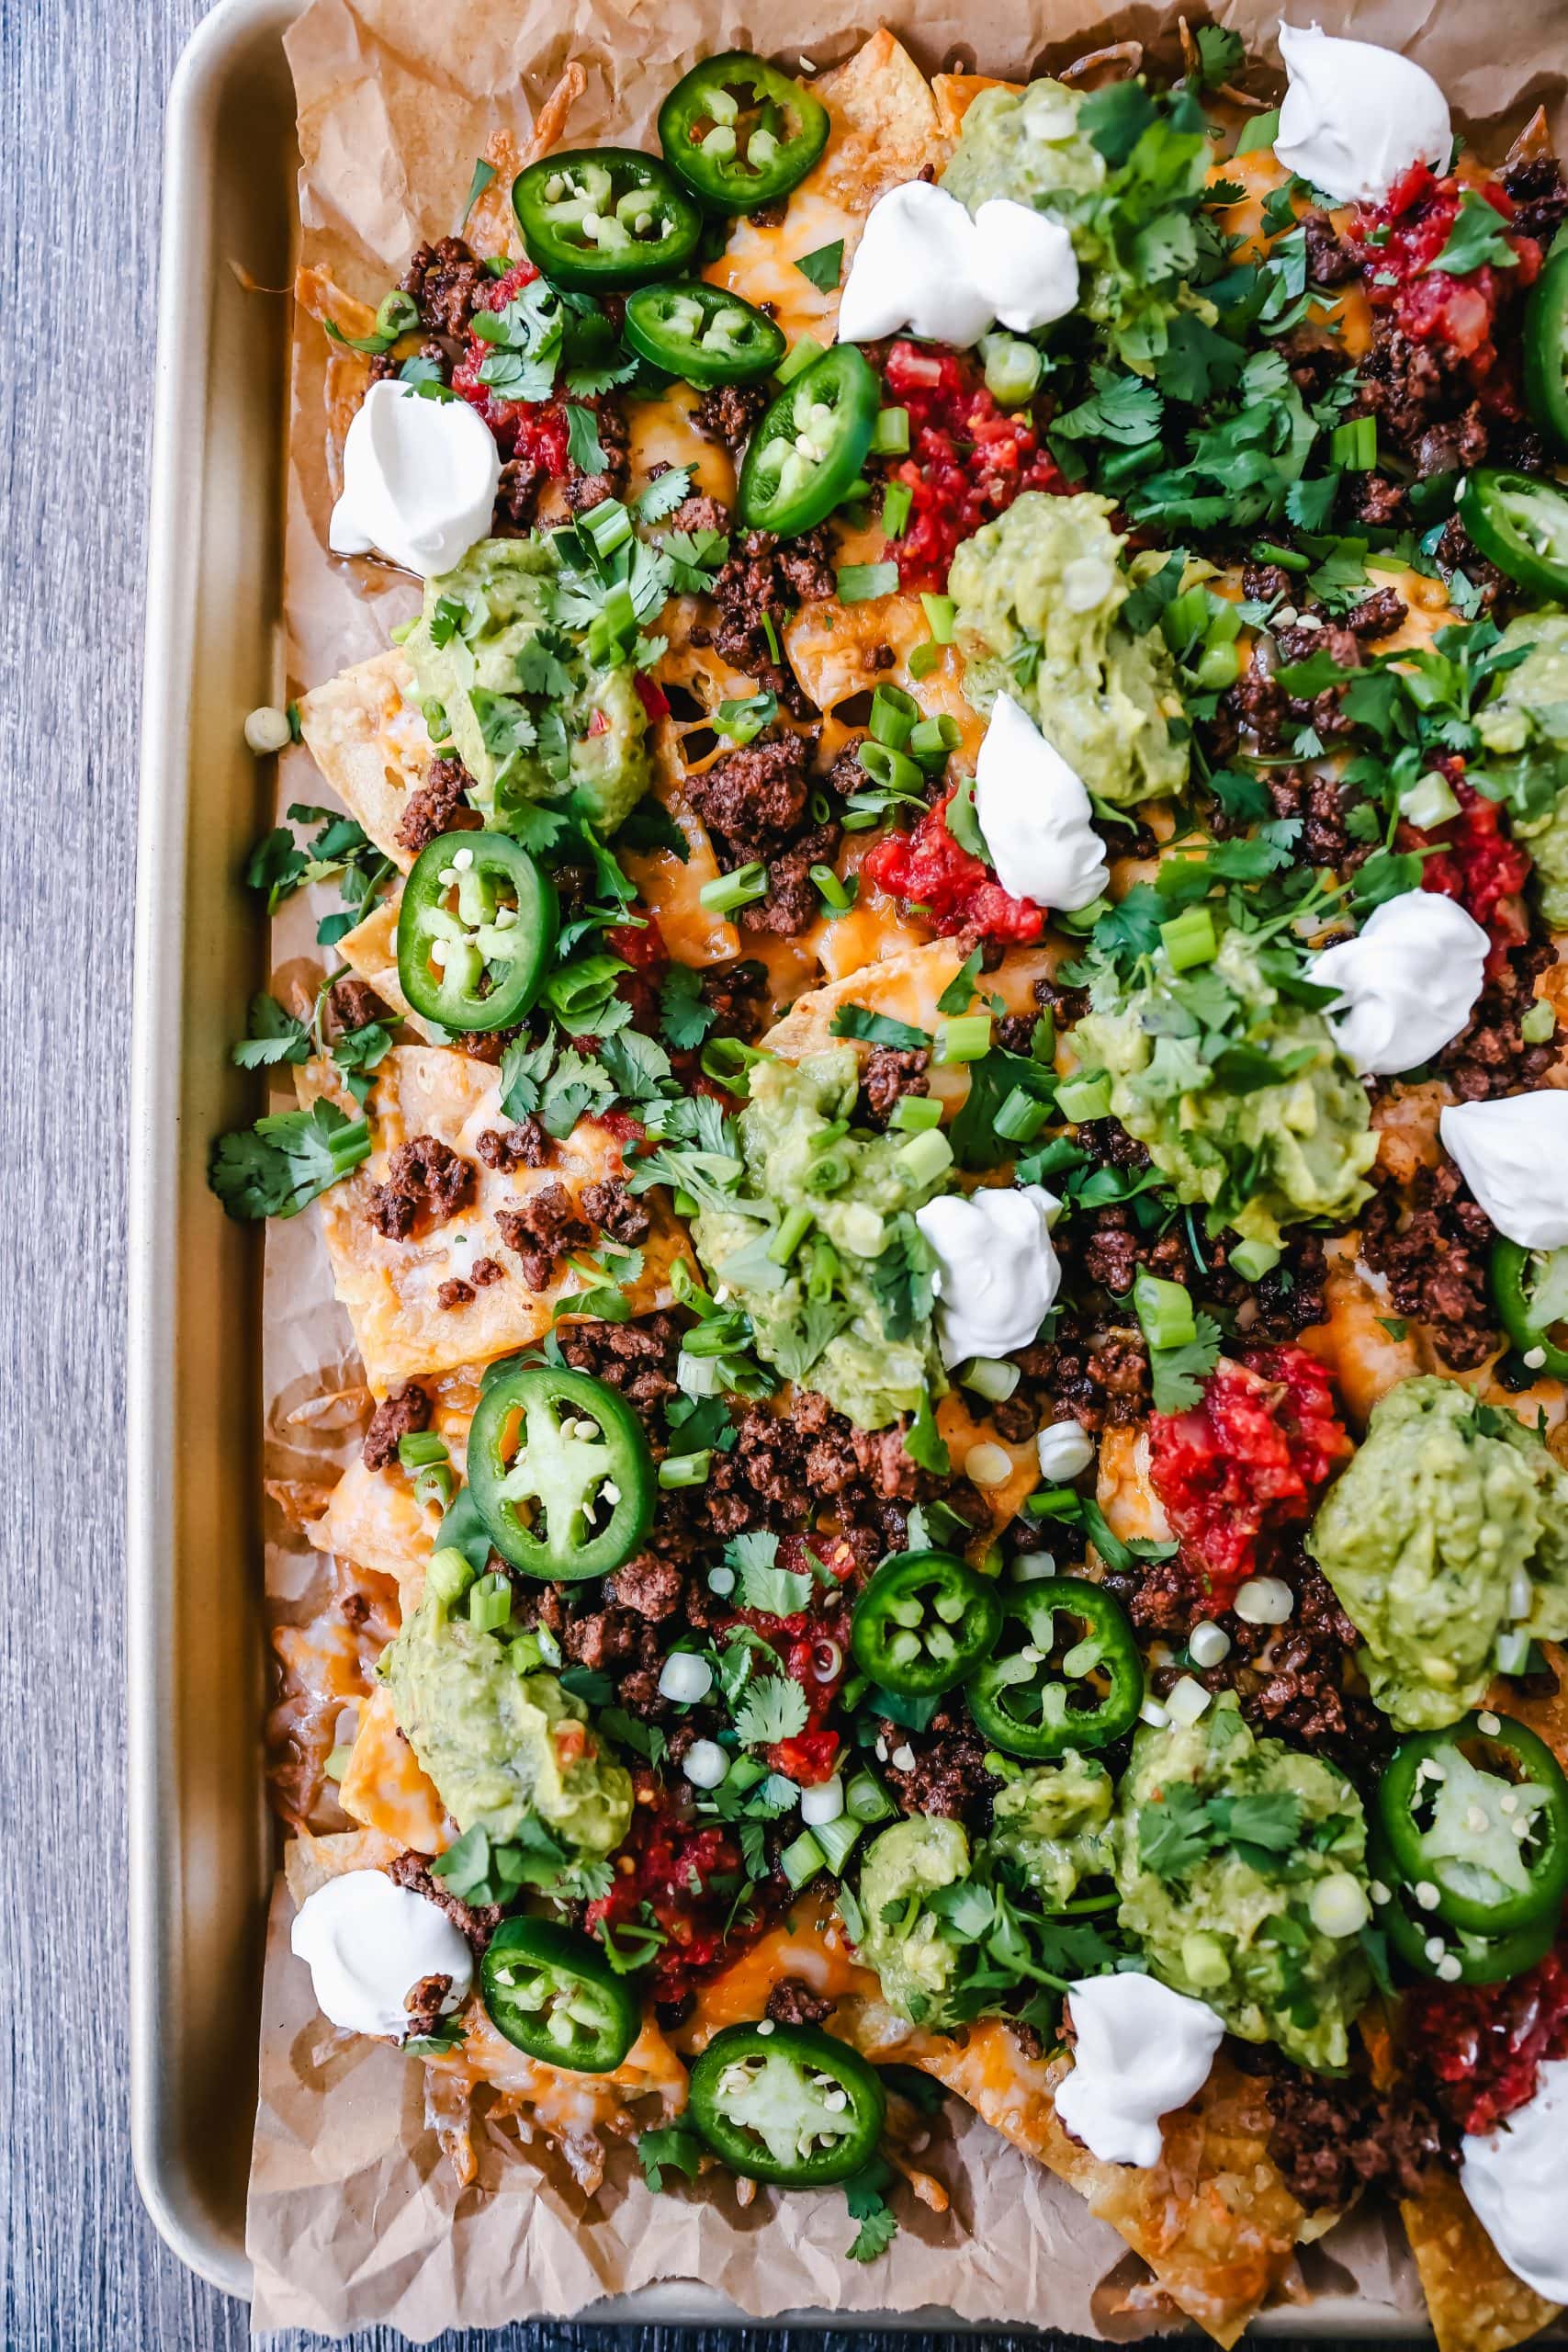 Ground Beef Nachos Recipe  Seasoned ground beef with crispy tortilla chips, Mexican cheeses, fresh guacamole, sour cream, jalapenos, fresh salsa, green onions, and cilantro make the best beef nachos!